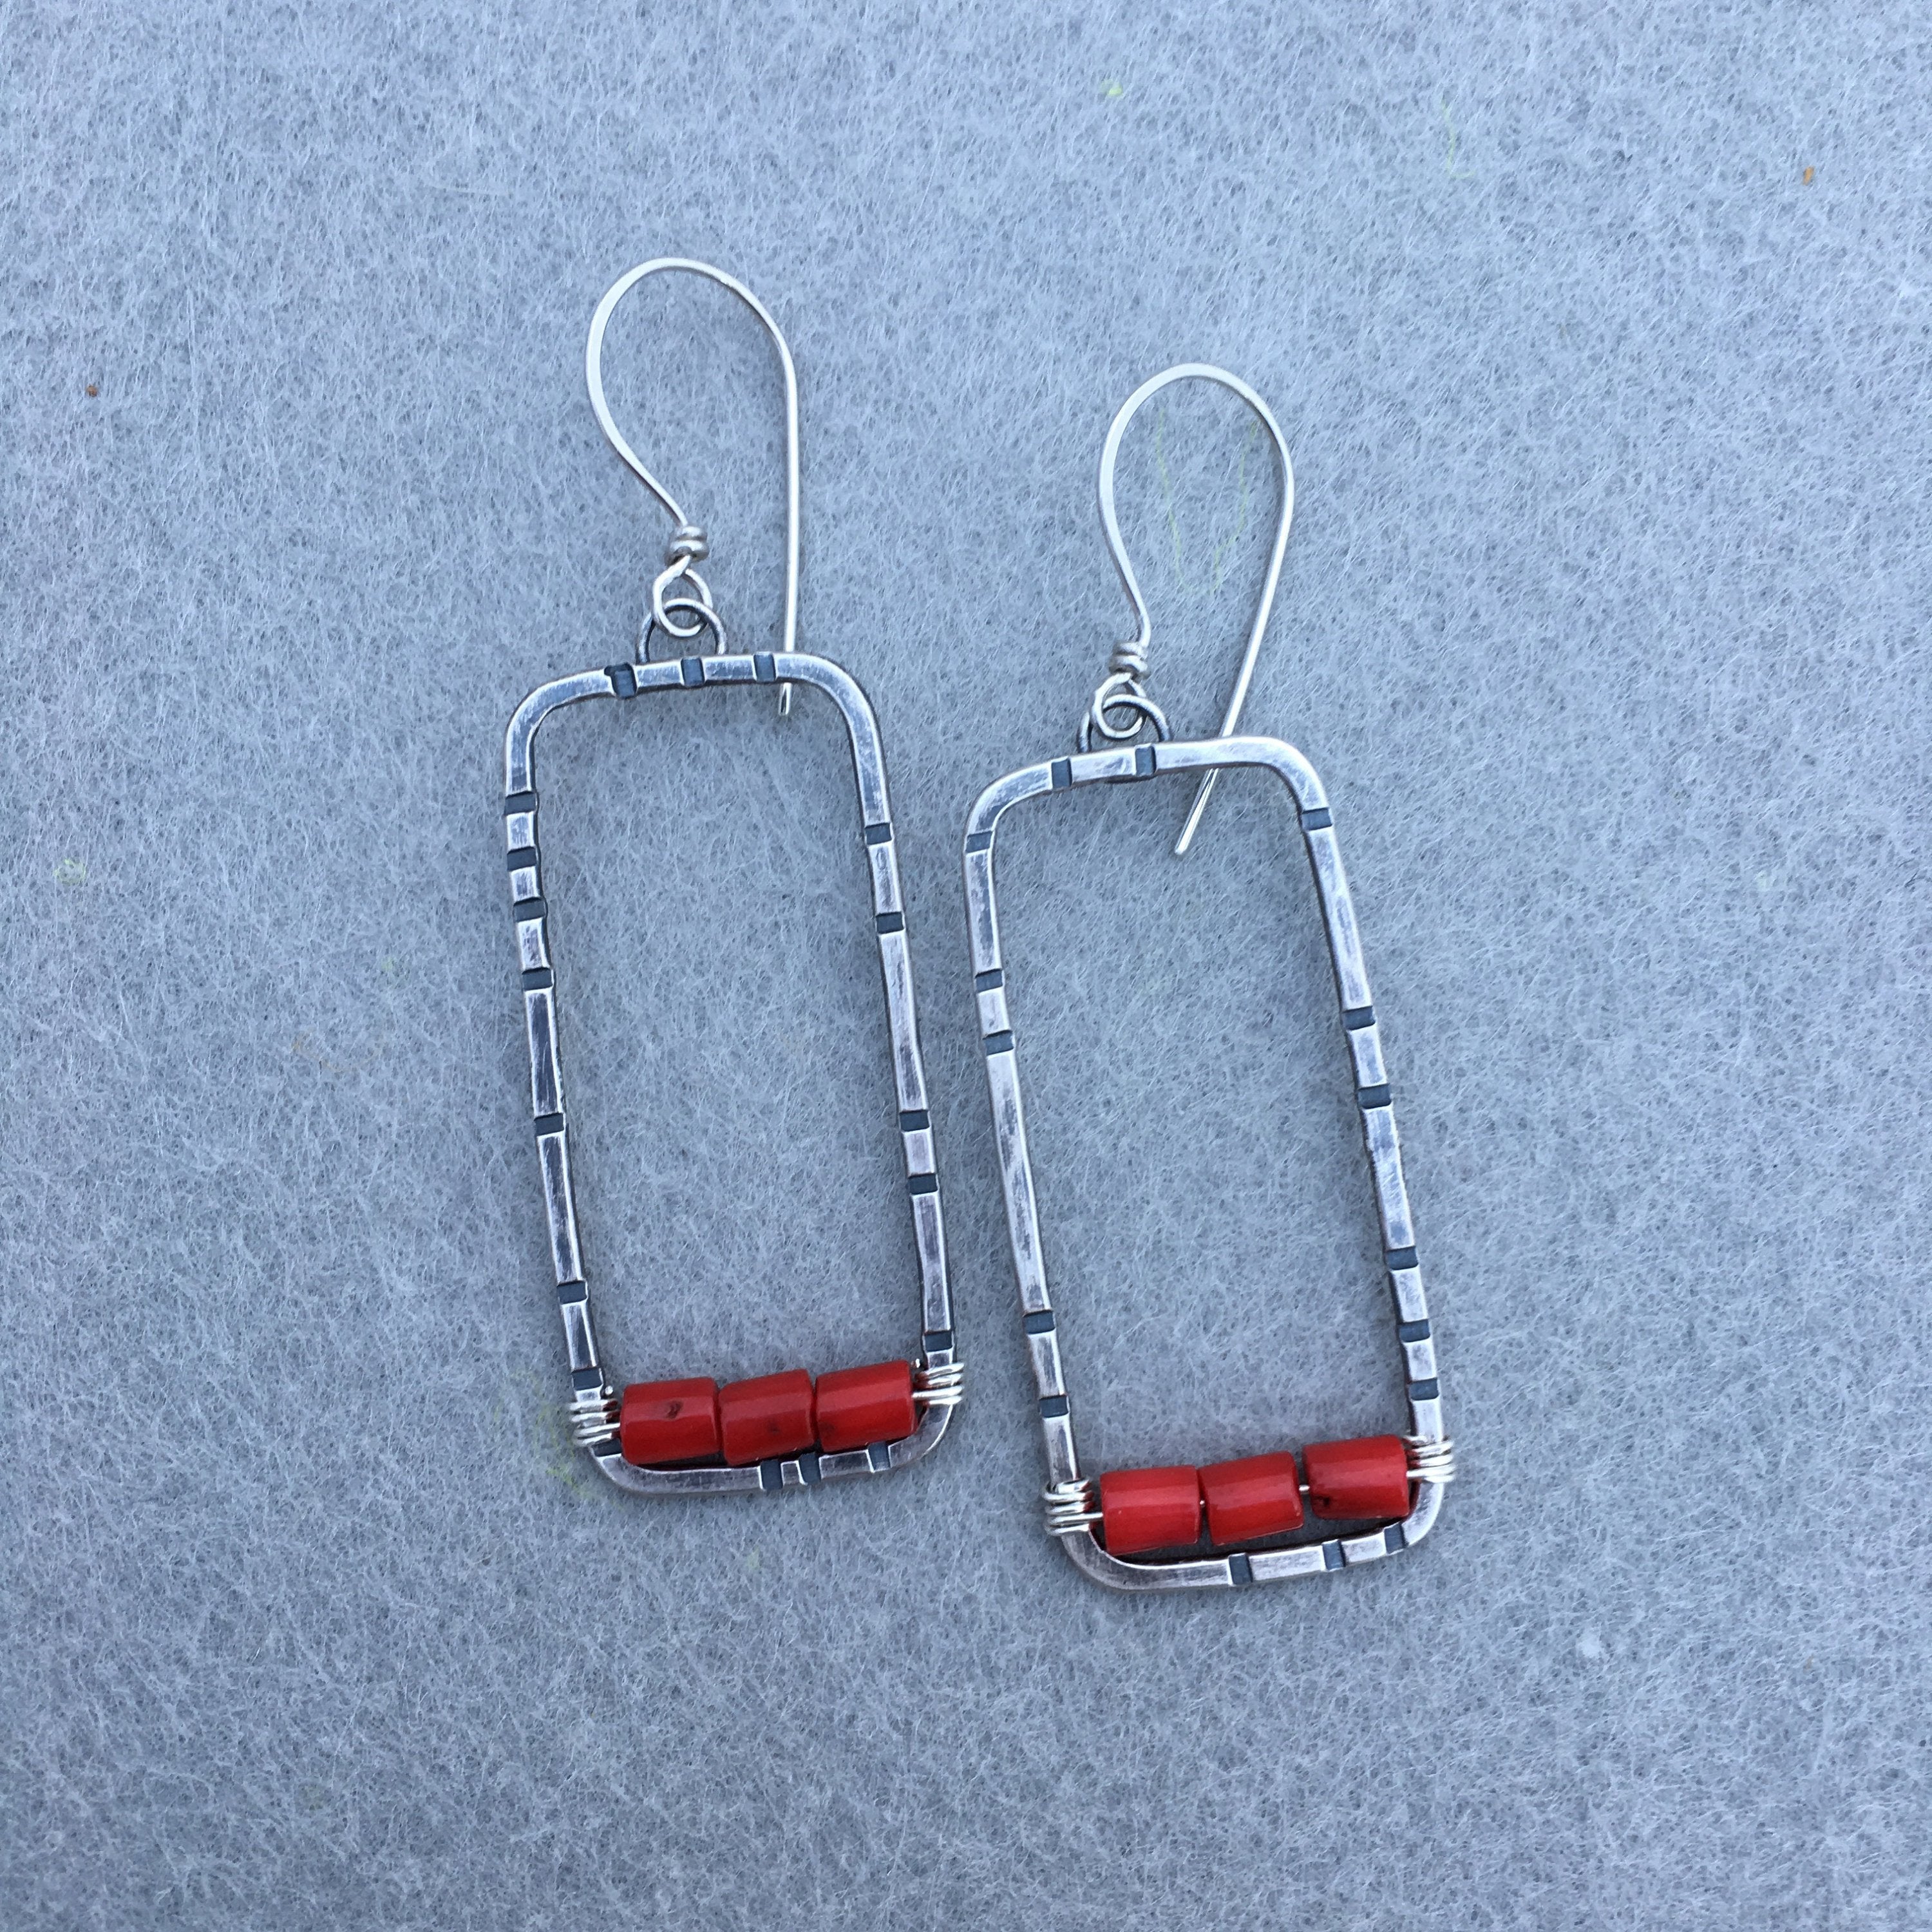 Rectangular Hoop Earrings with Stamped Sterling Silver and Red Coral - MADE TO ORDER